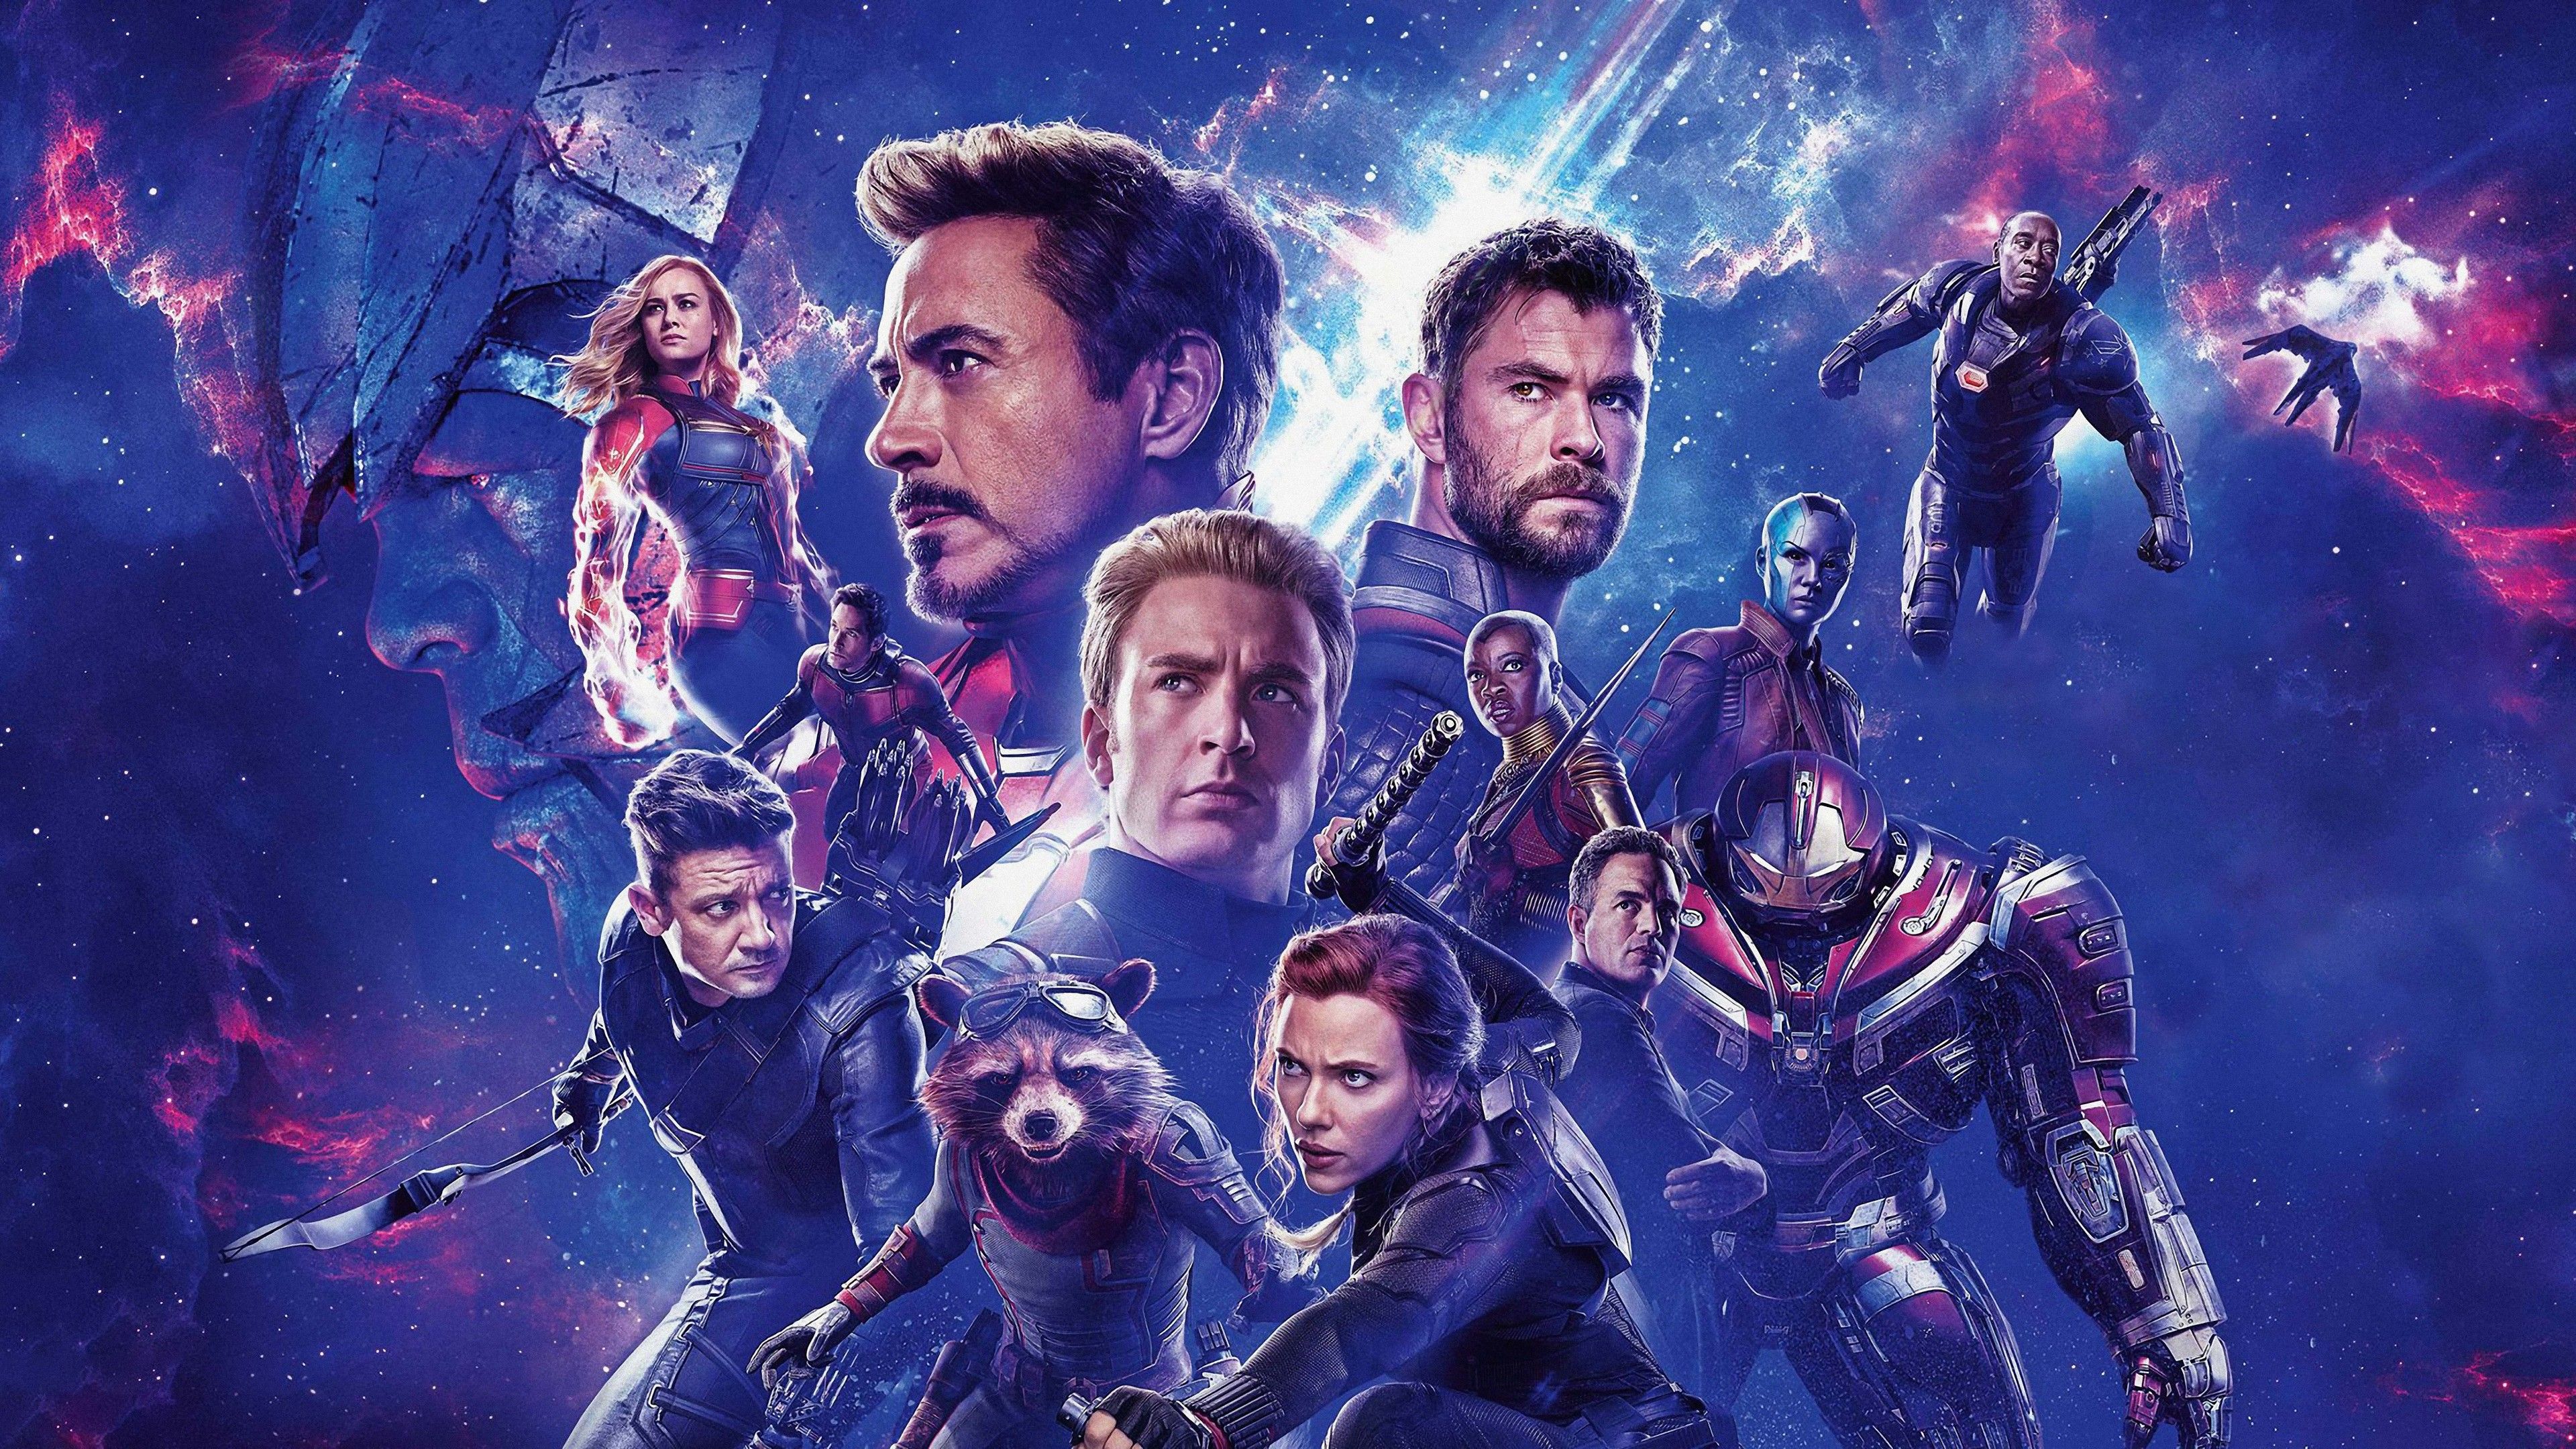 Avengers Endgame 4k poster wallpapers, movies wallpapers, hd